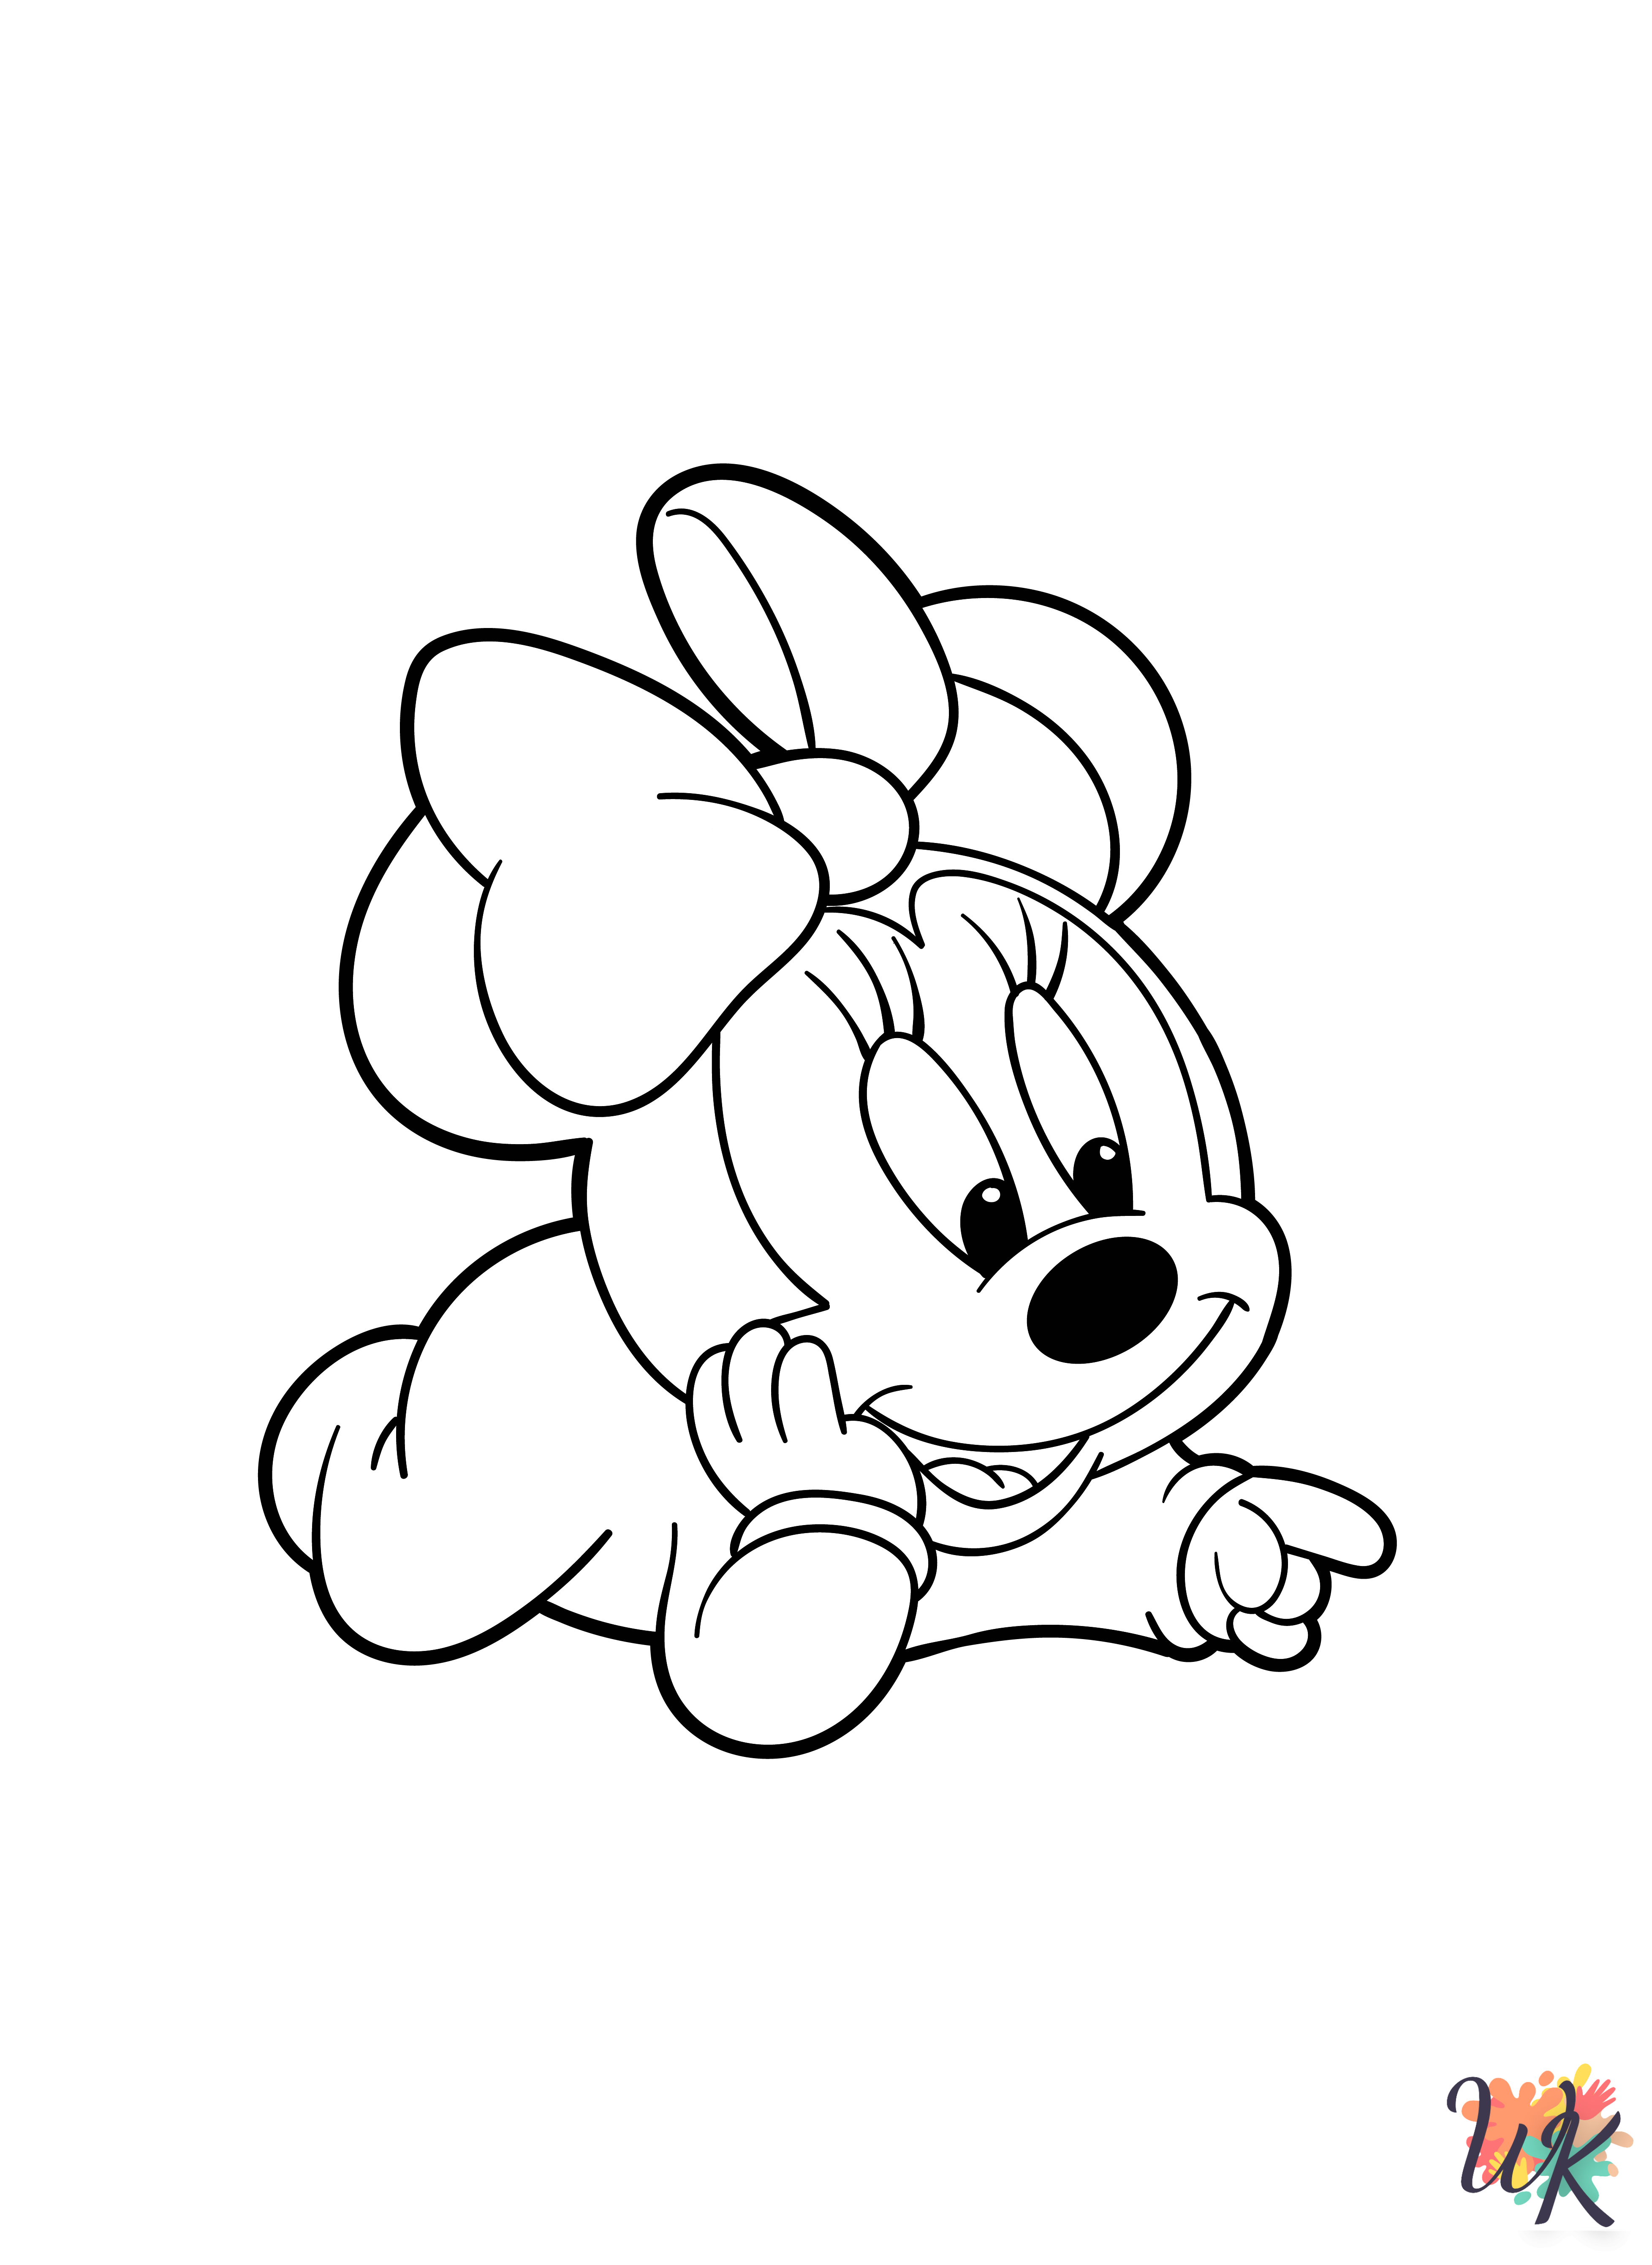 printable Minnie Mouse coloring pages for adults